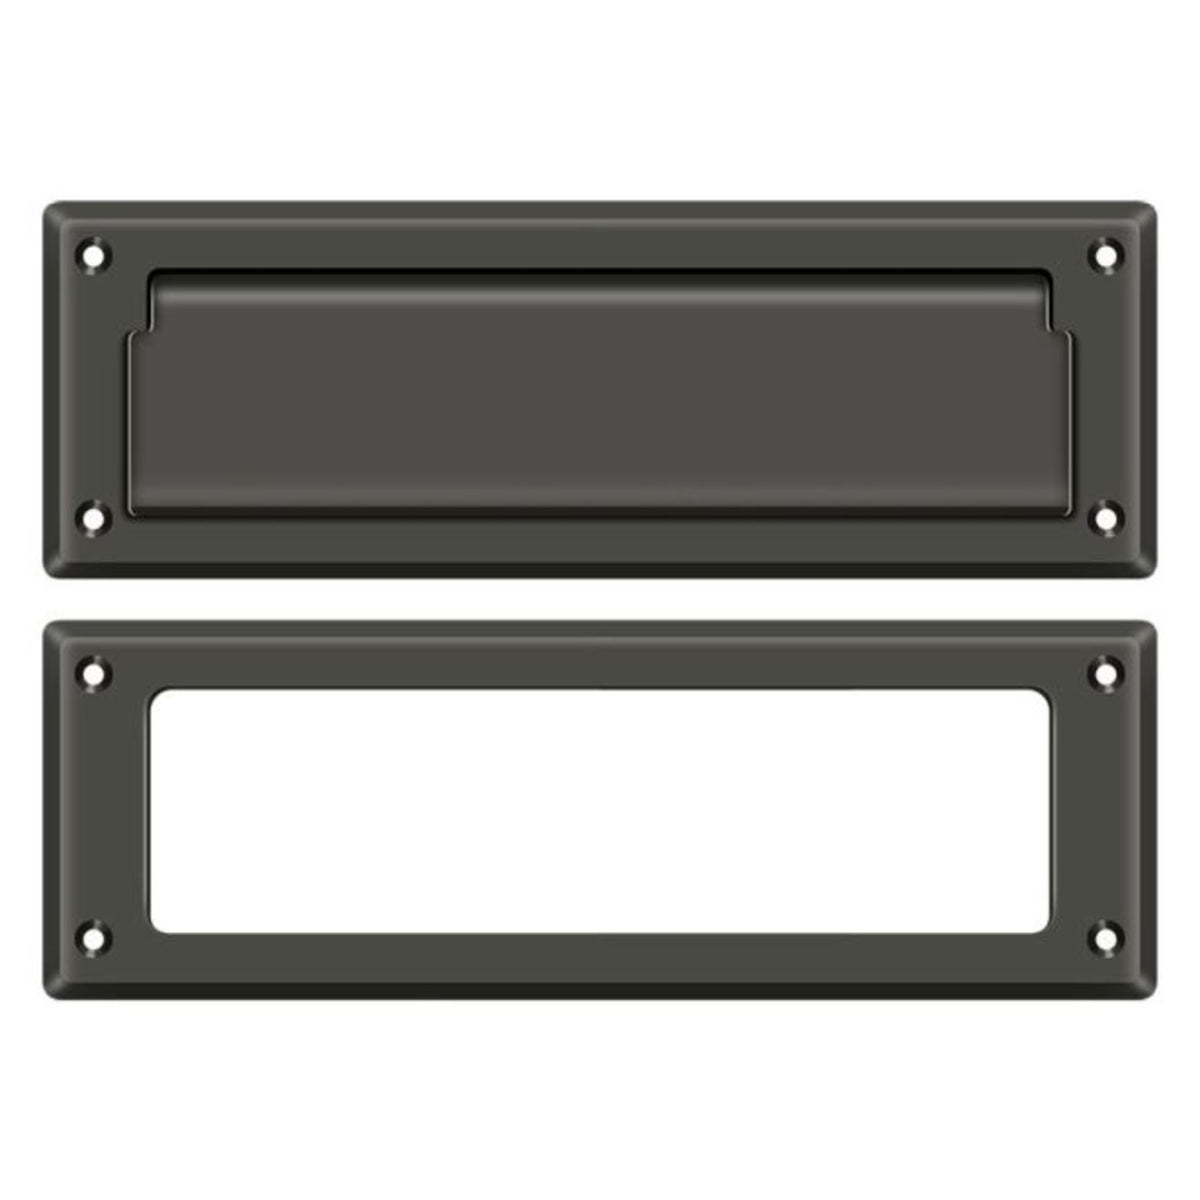 Deltana MS626U10B Mail Slot With Interior Frame, Oil Rubbed Bronze